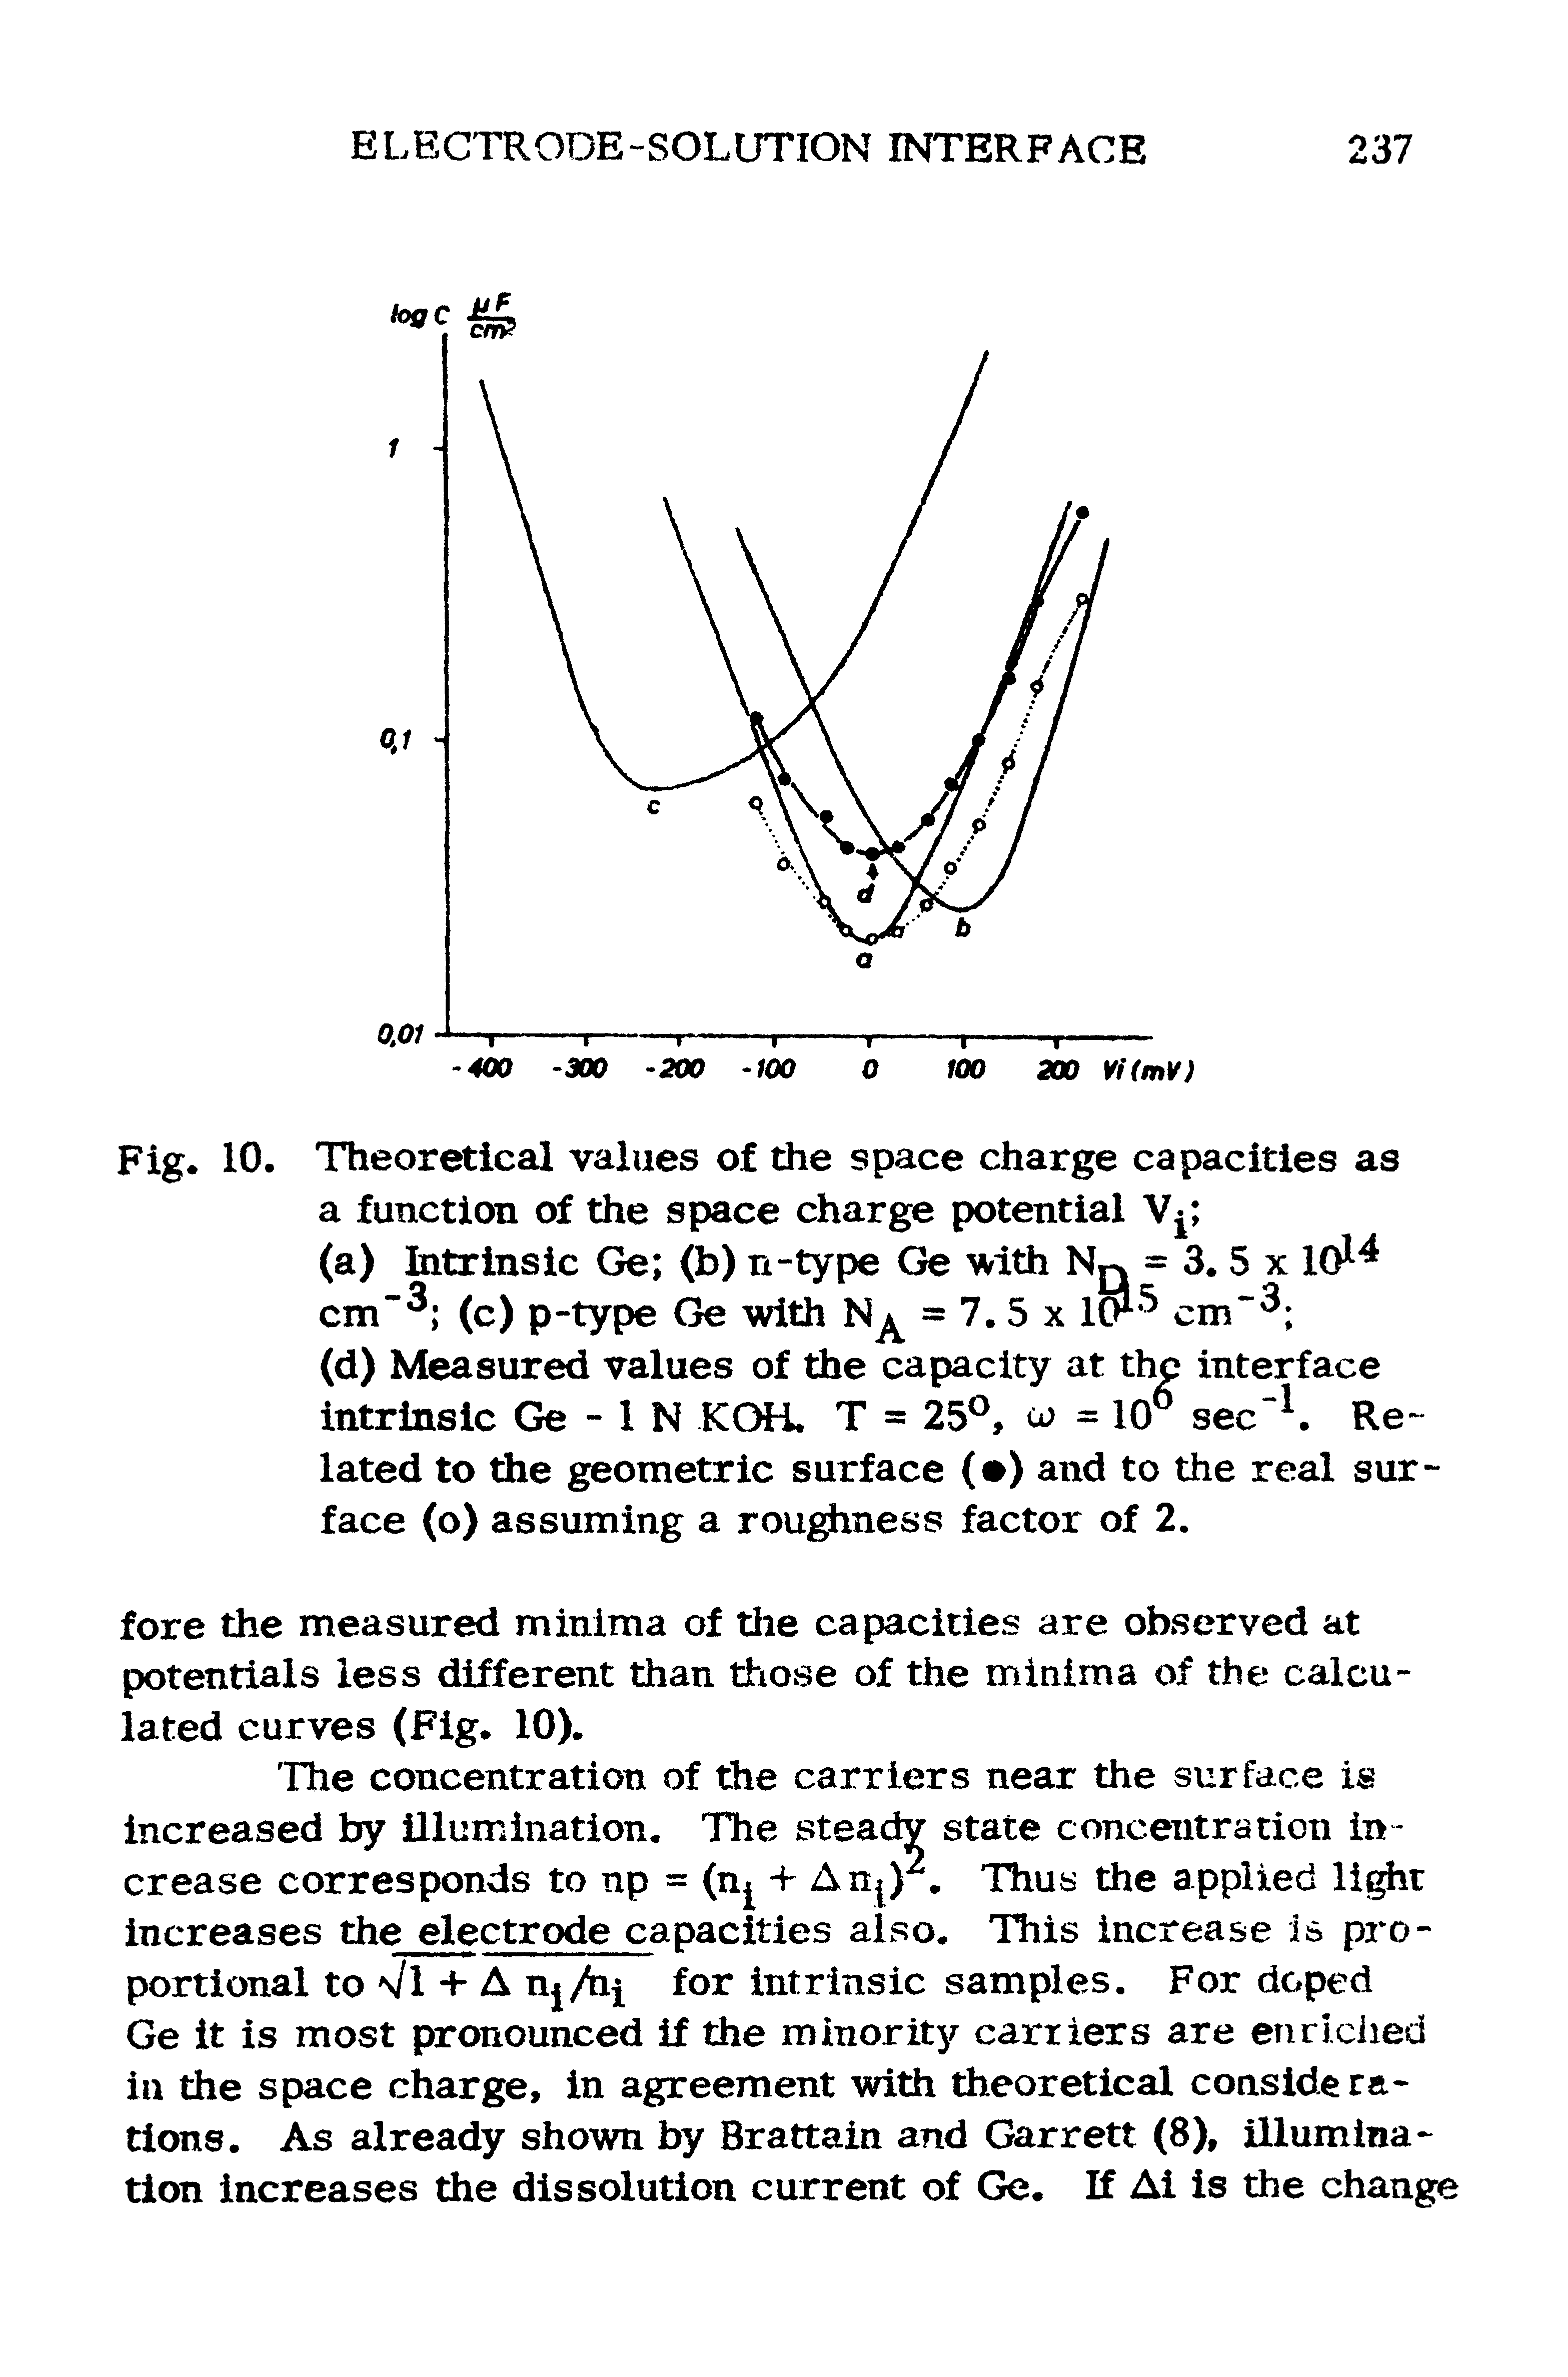 Fig. 10. Theoretical values of the space charge capacities as a function of the space charge potential V ...